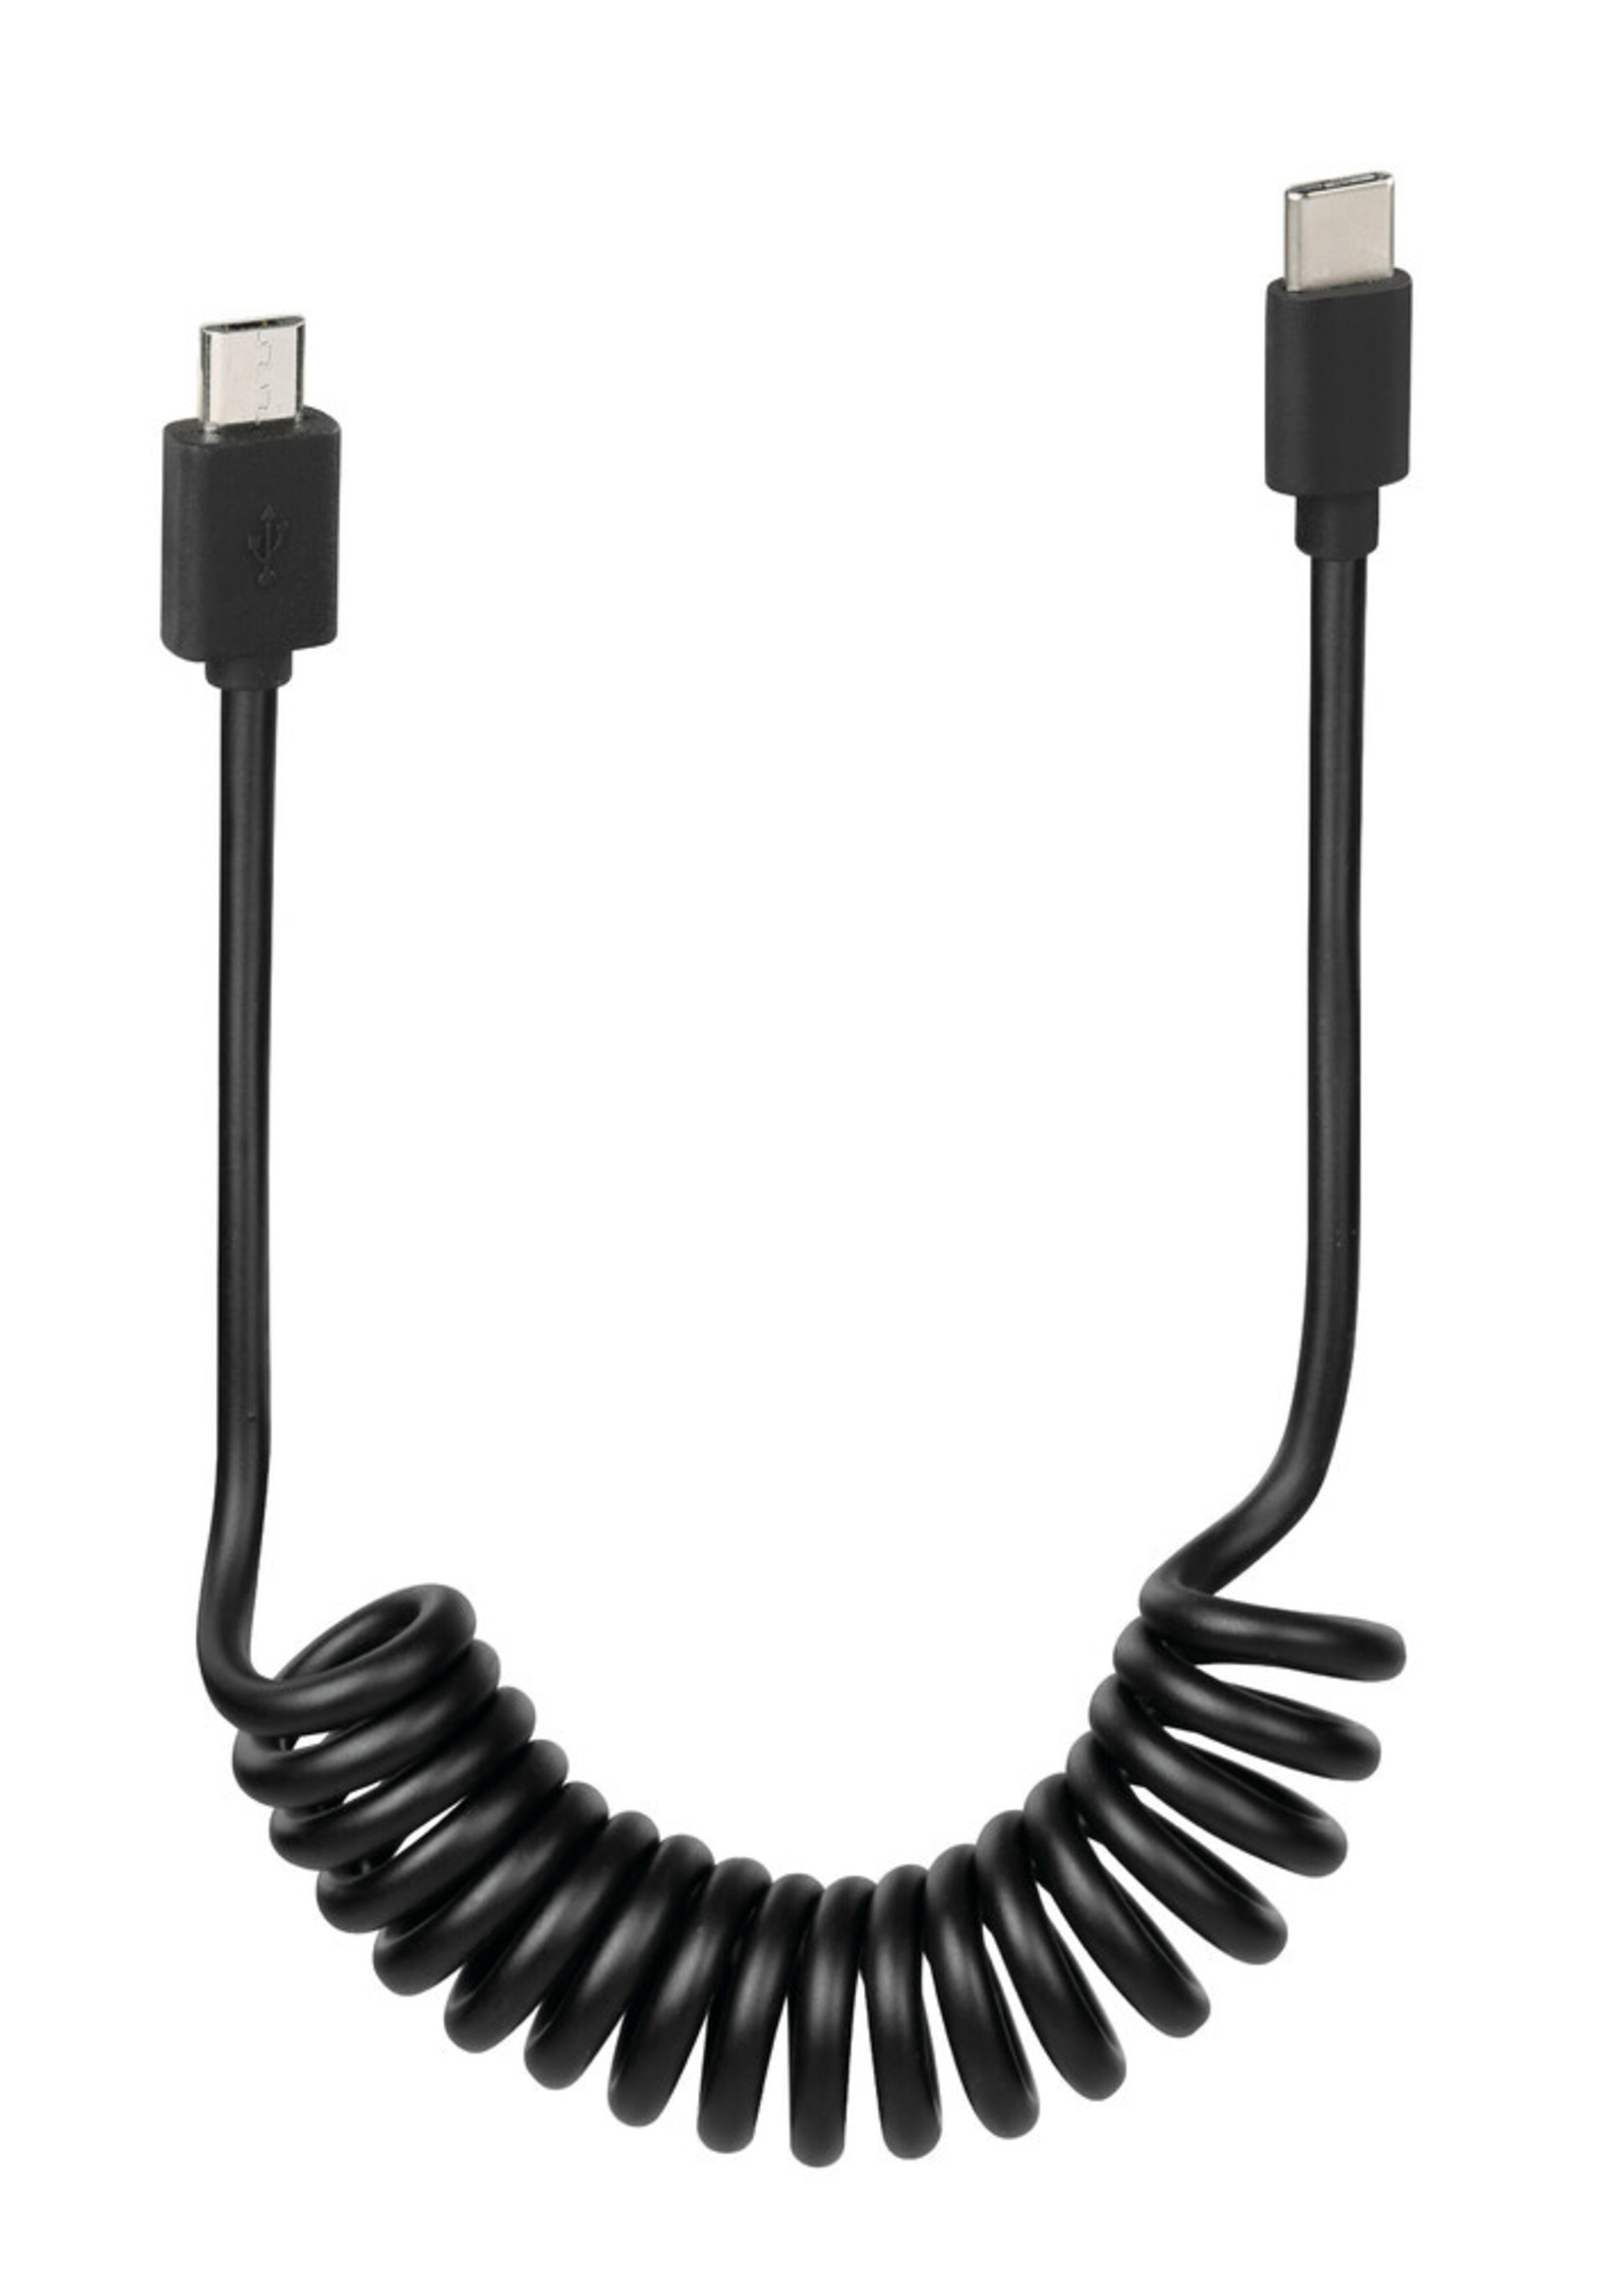 Optiline Spring cable for Ebike, Micro Usb > Type C